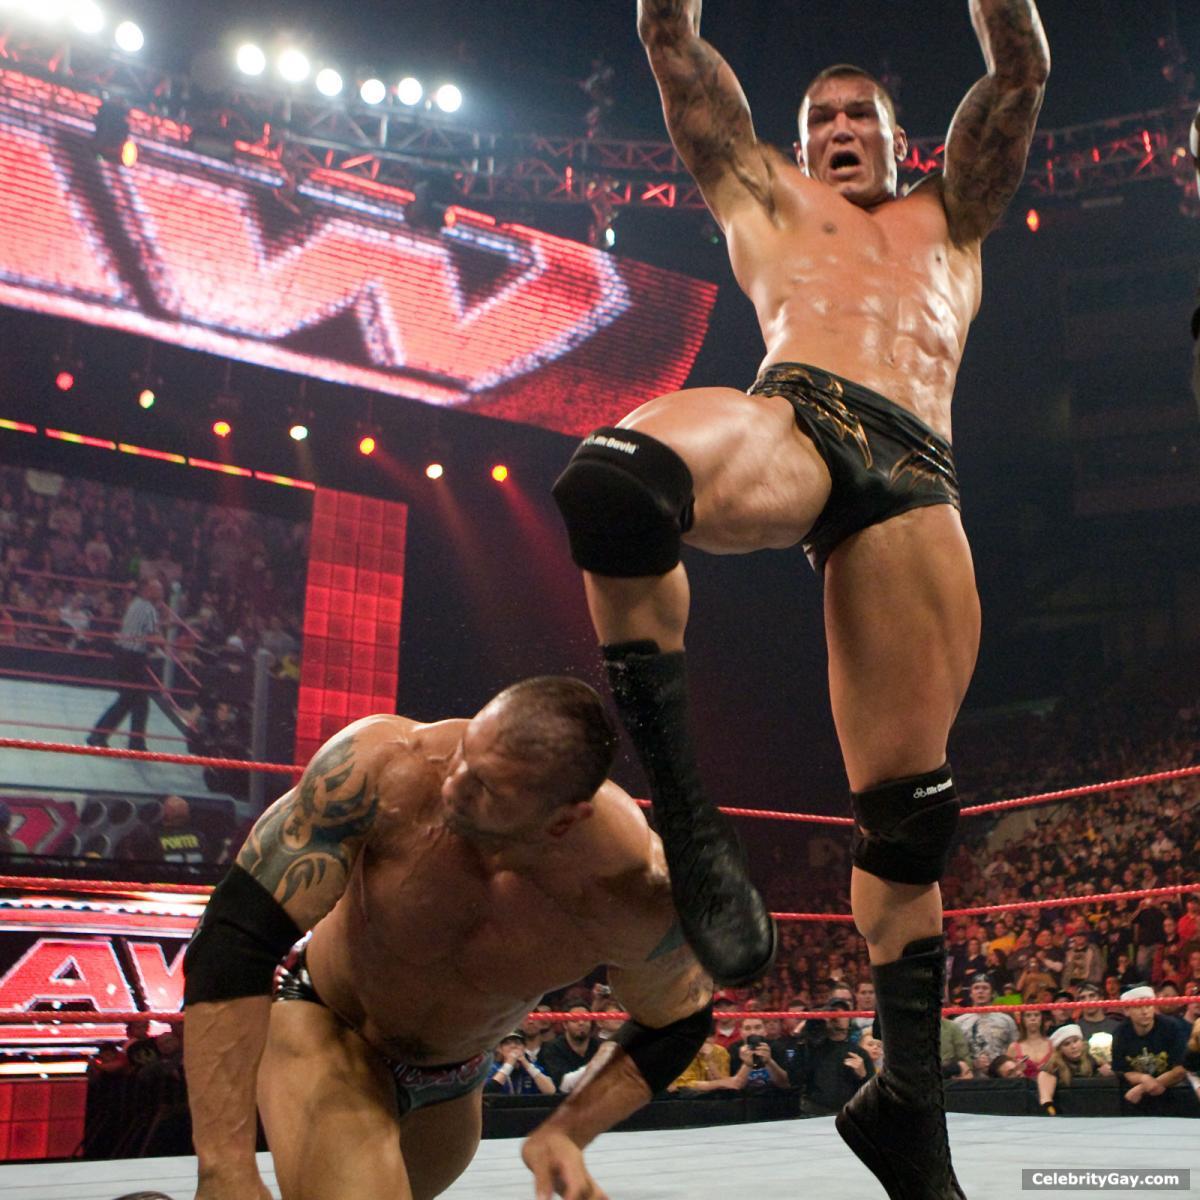 Randy Orton is a WWE wrestler, notable for his endless feuds with Cena and ...